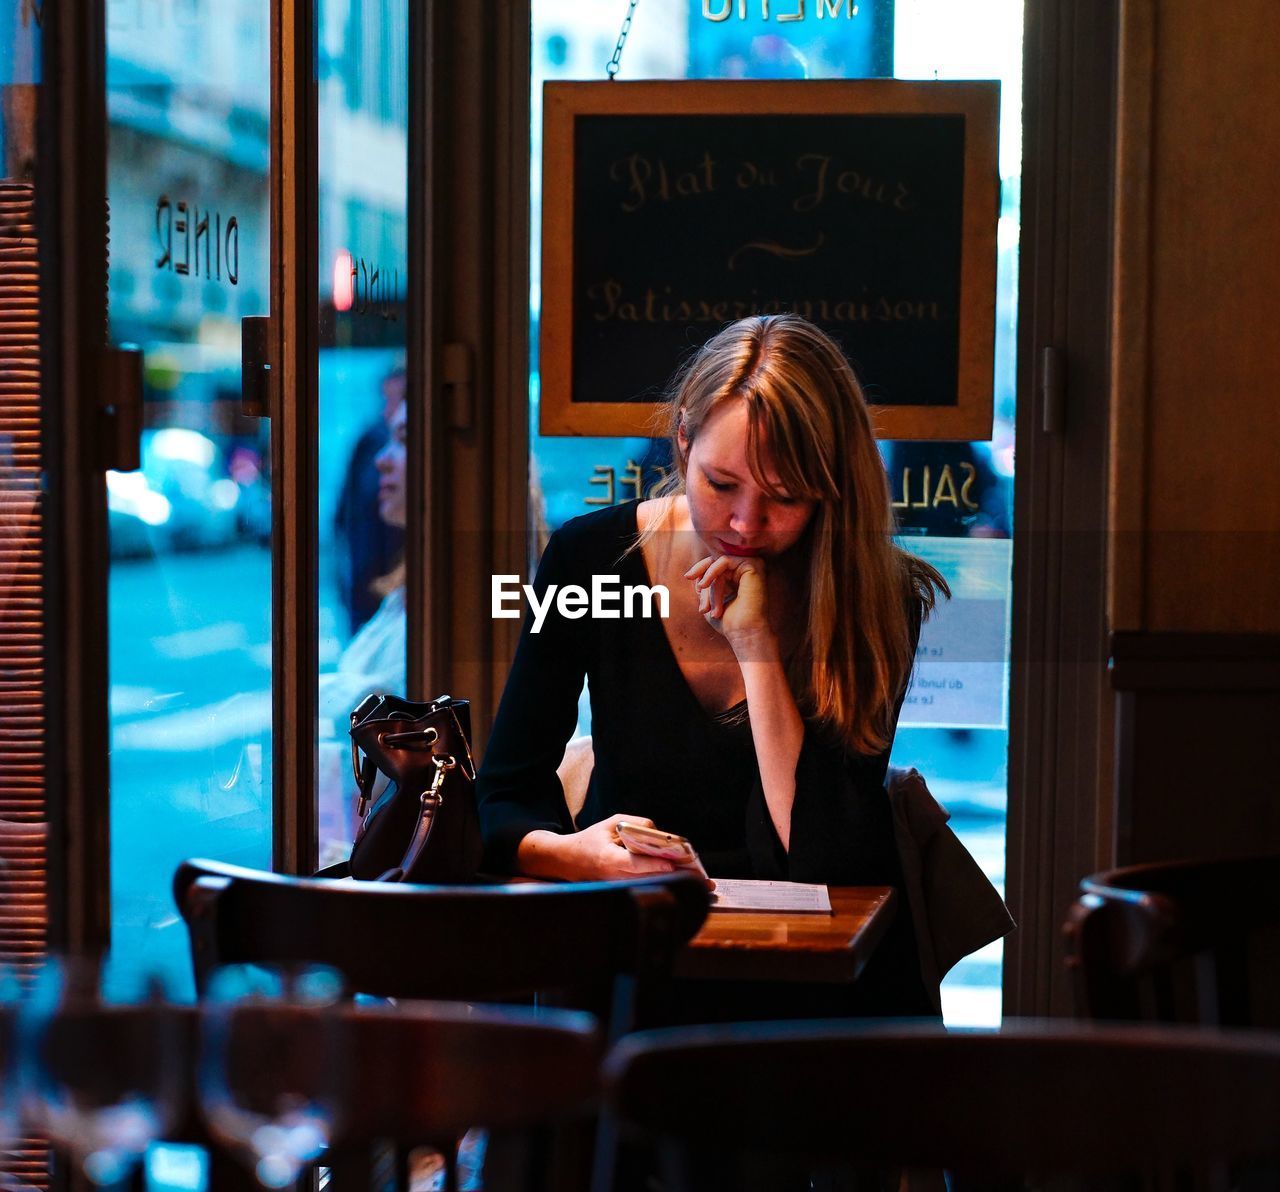 PORTRAIT OF WOMAN SITTING IN RESTAURANT AT CAFE